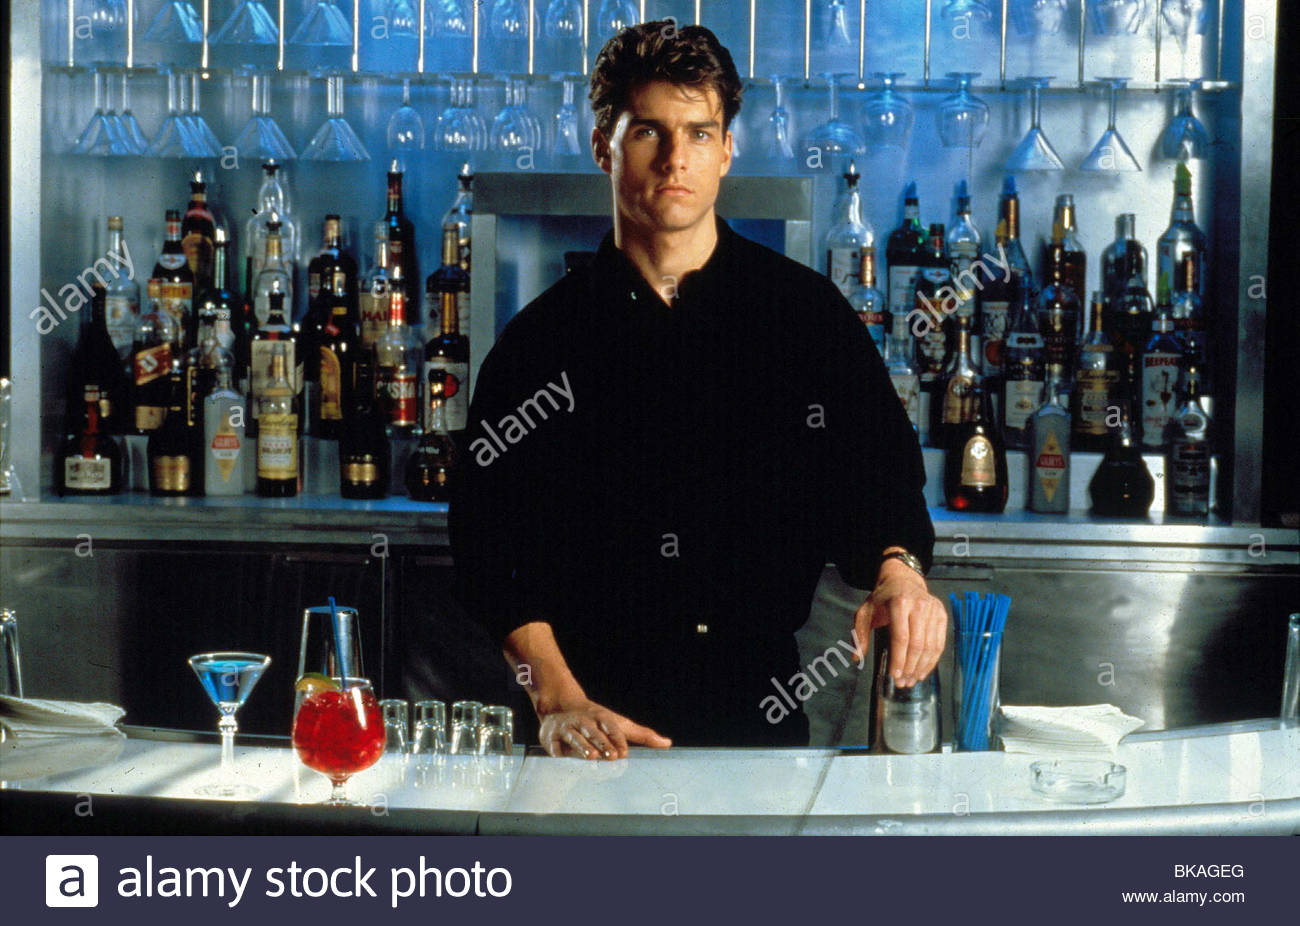 Tom Cruise Cocktail Stock Photos Tom Cruise Cocktail Stock